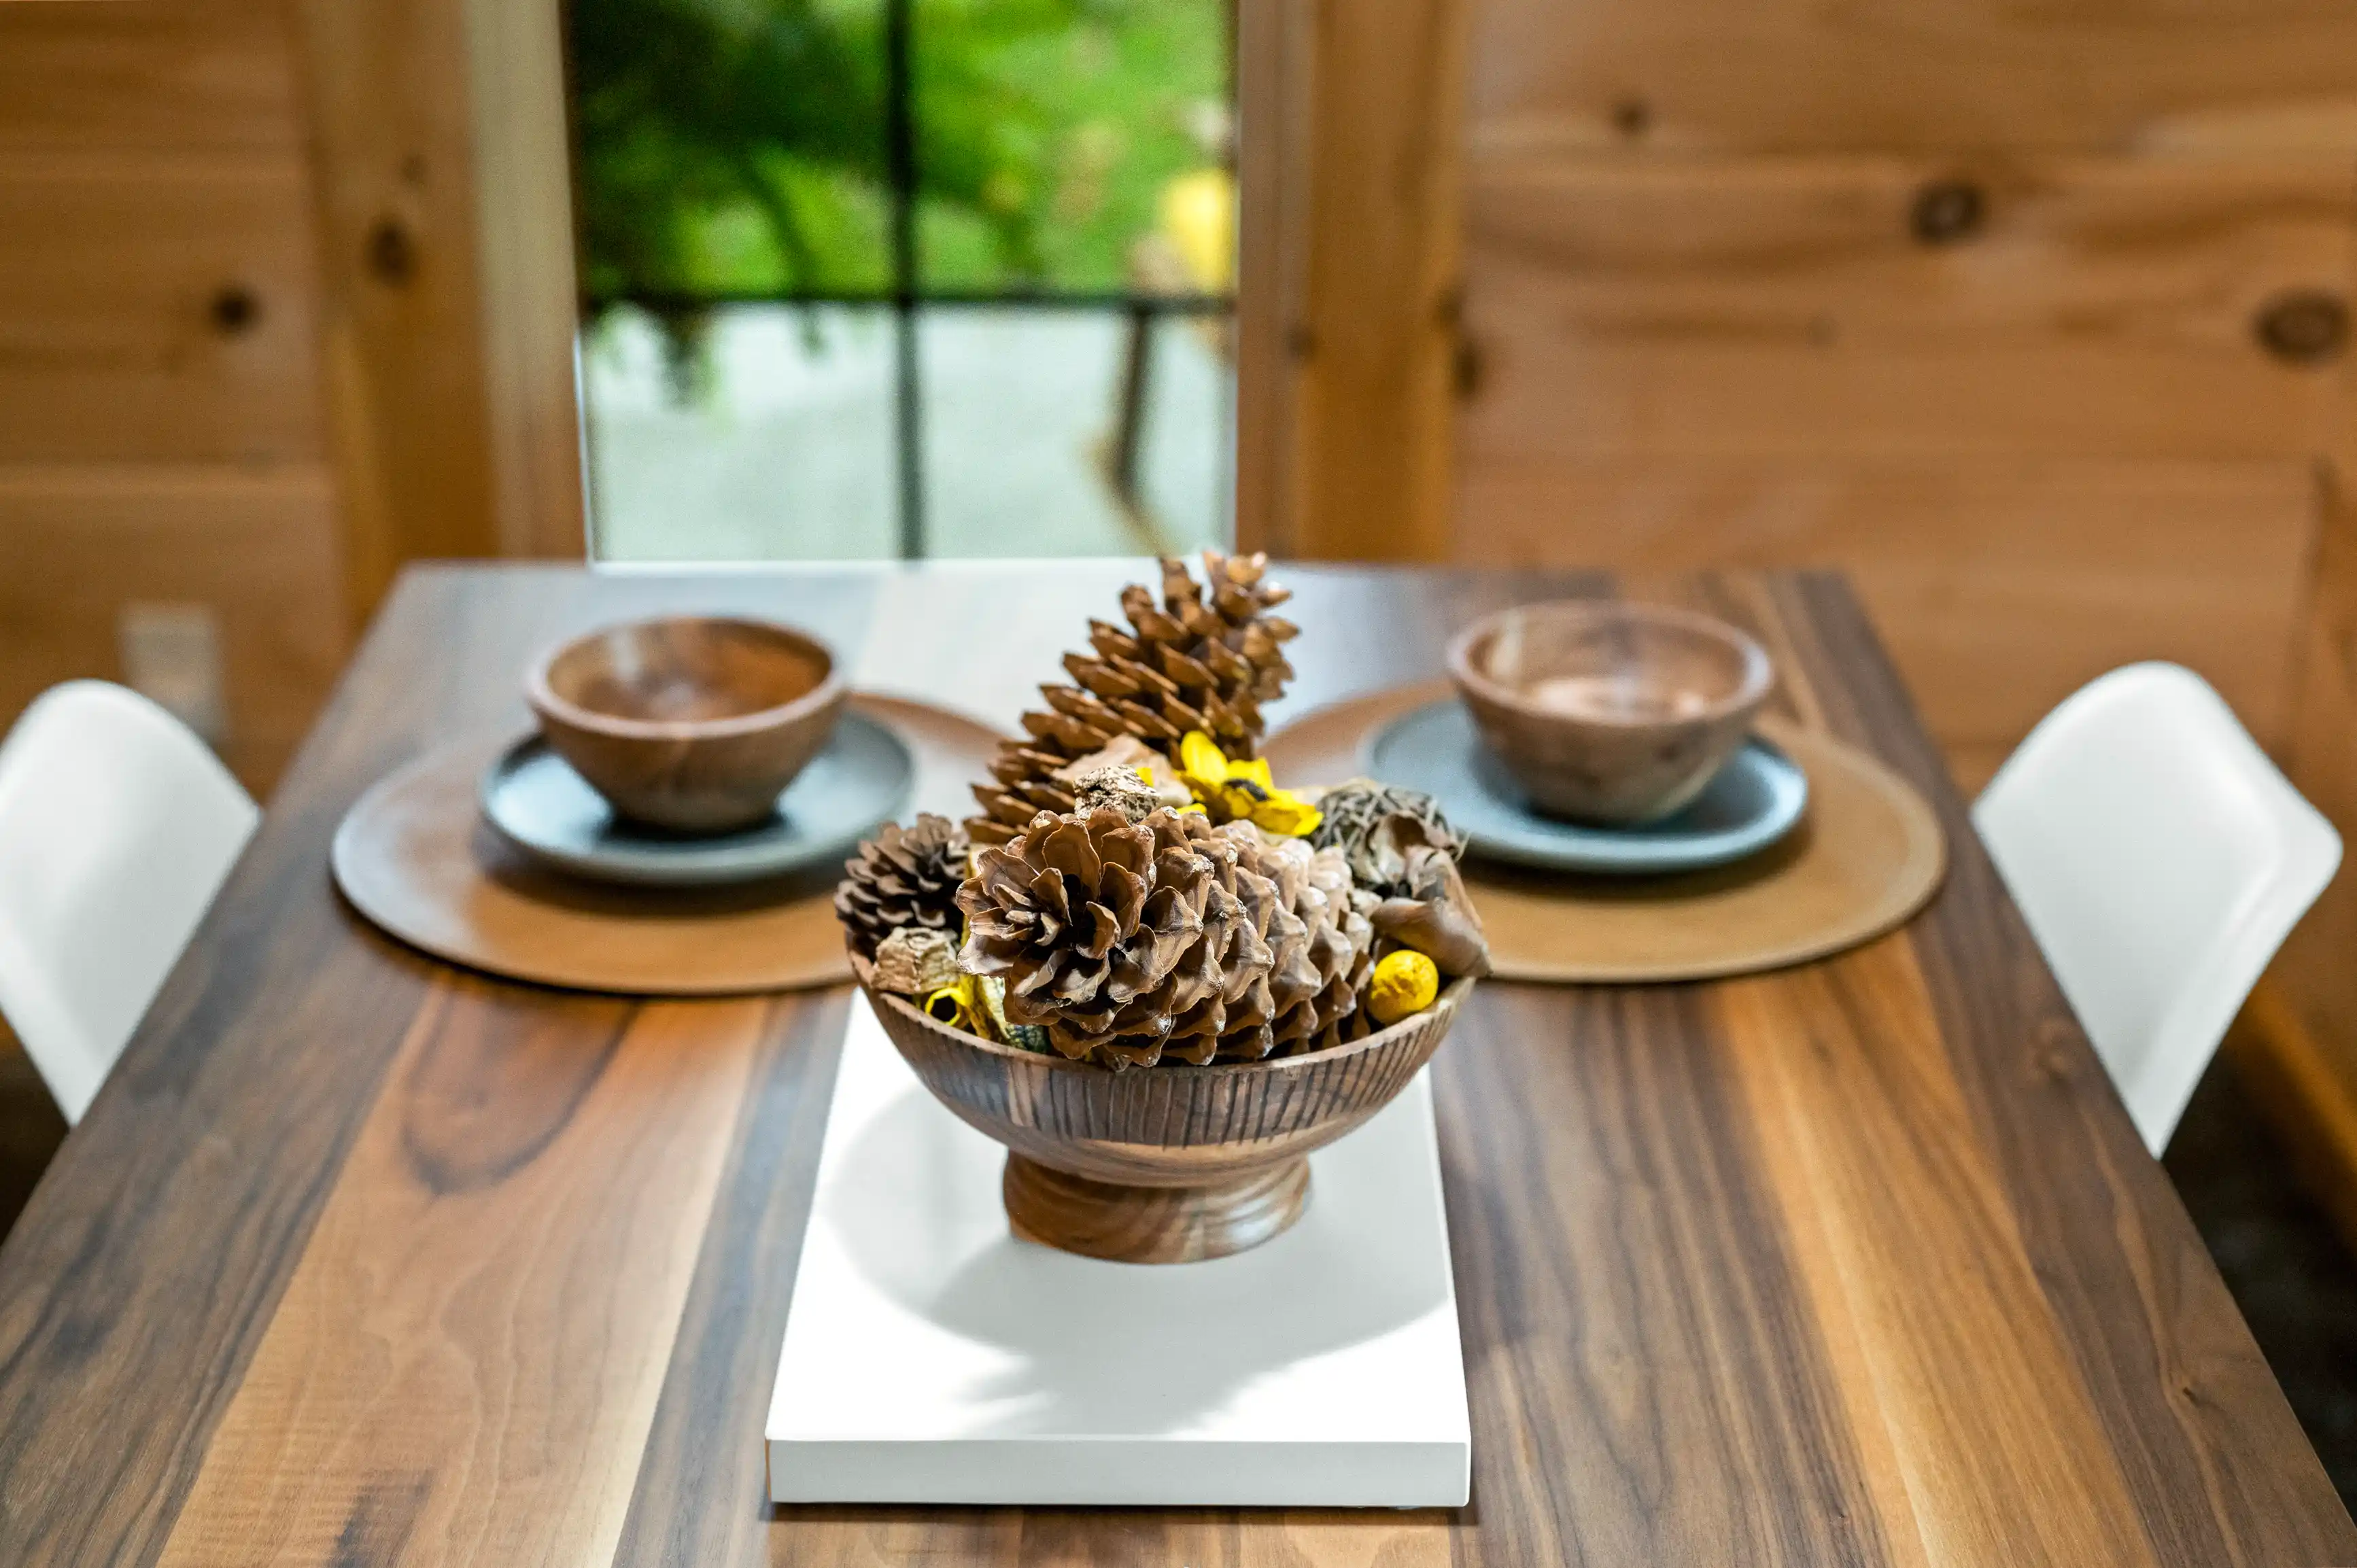 A wooden dining table set with a centerpiece of pine cones in a bowl, flanked by two wooden bowls on plates, with white chairs and a window view in the background.